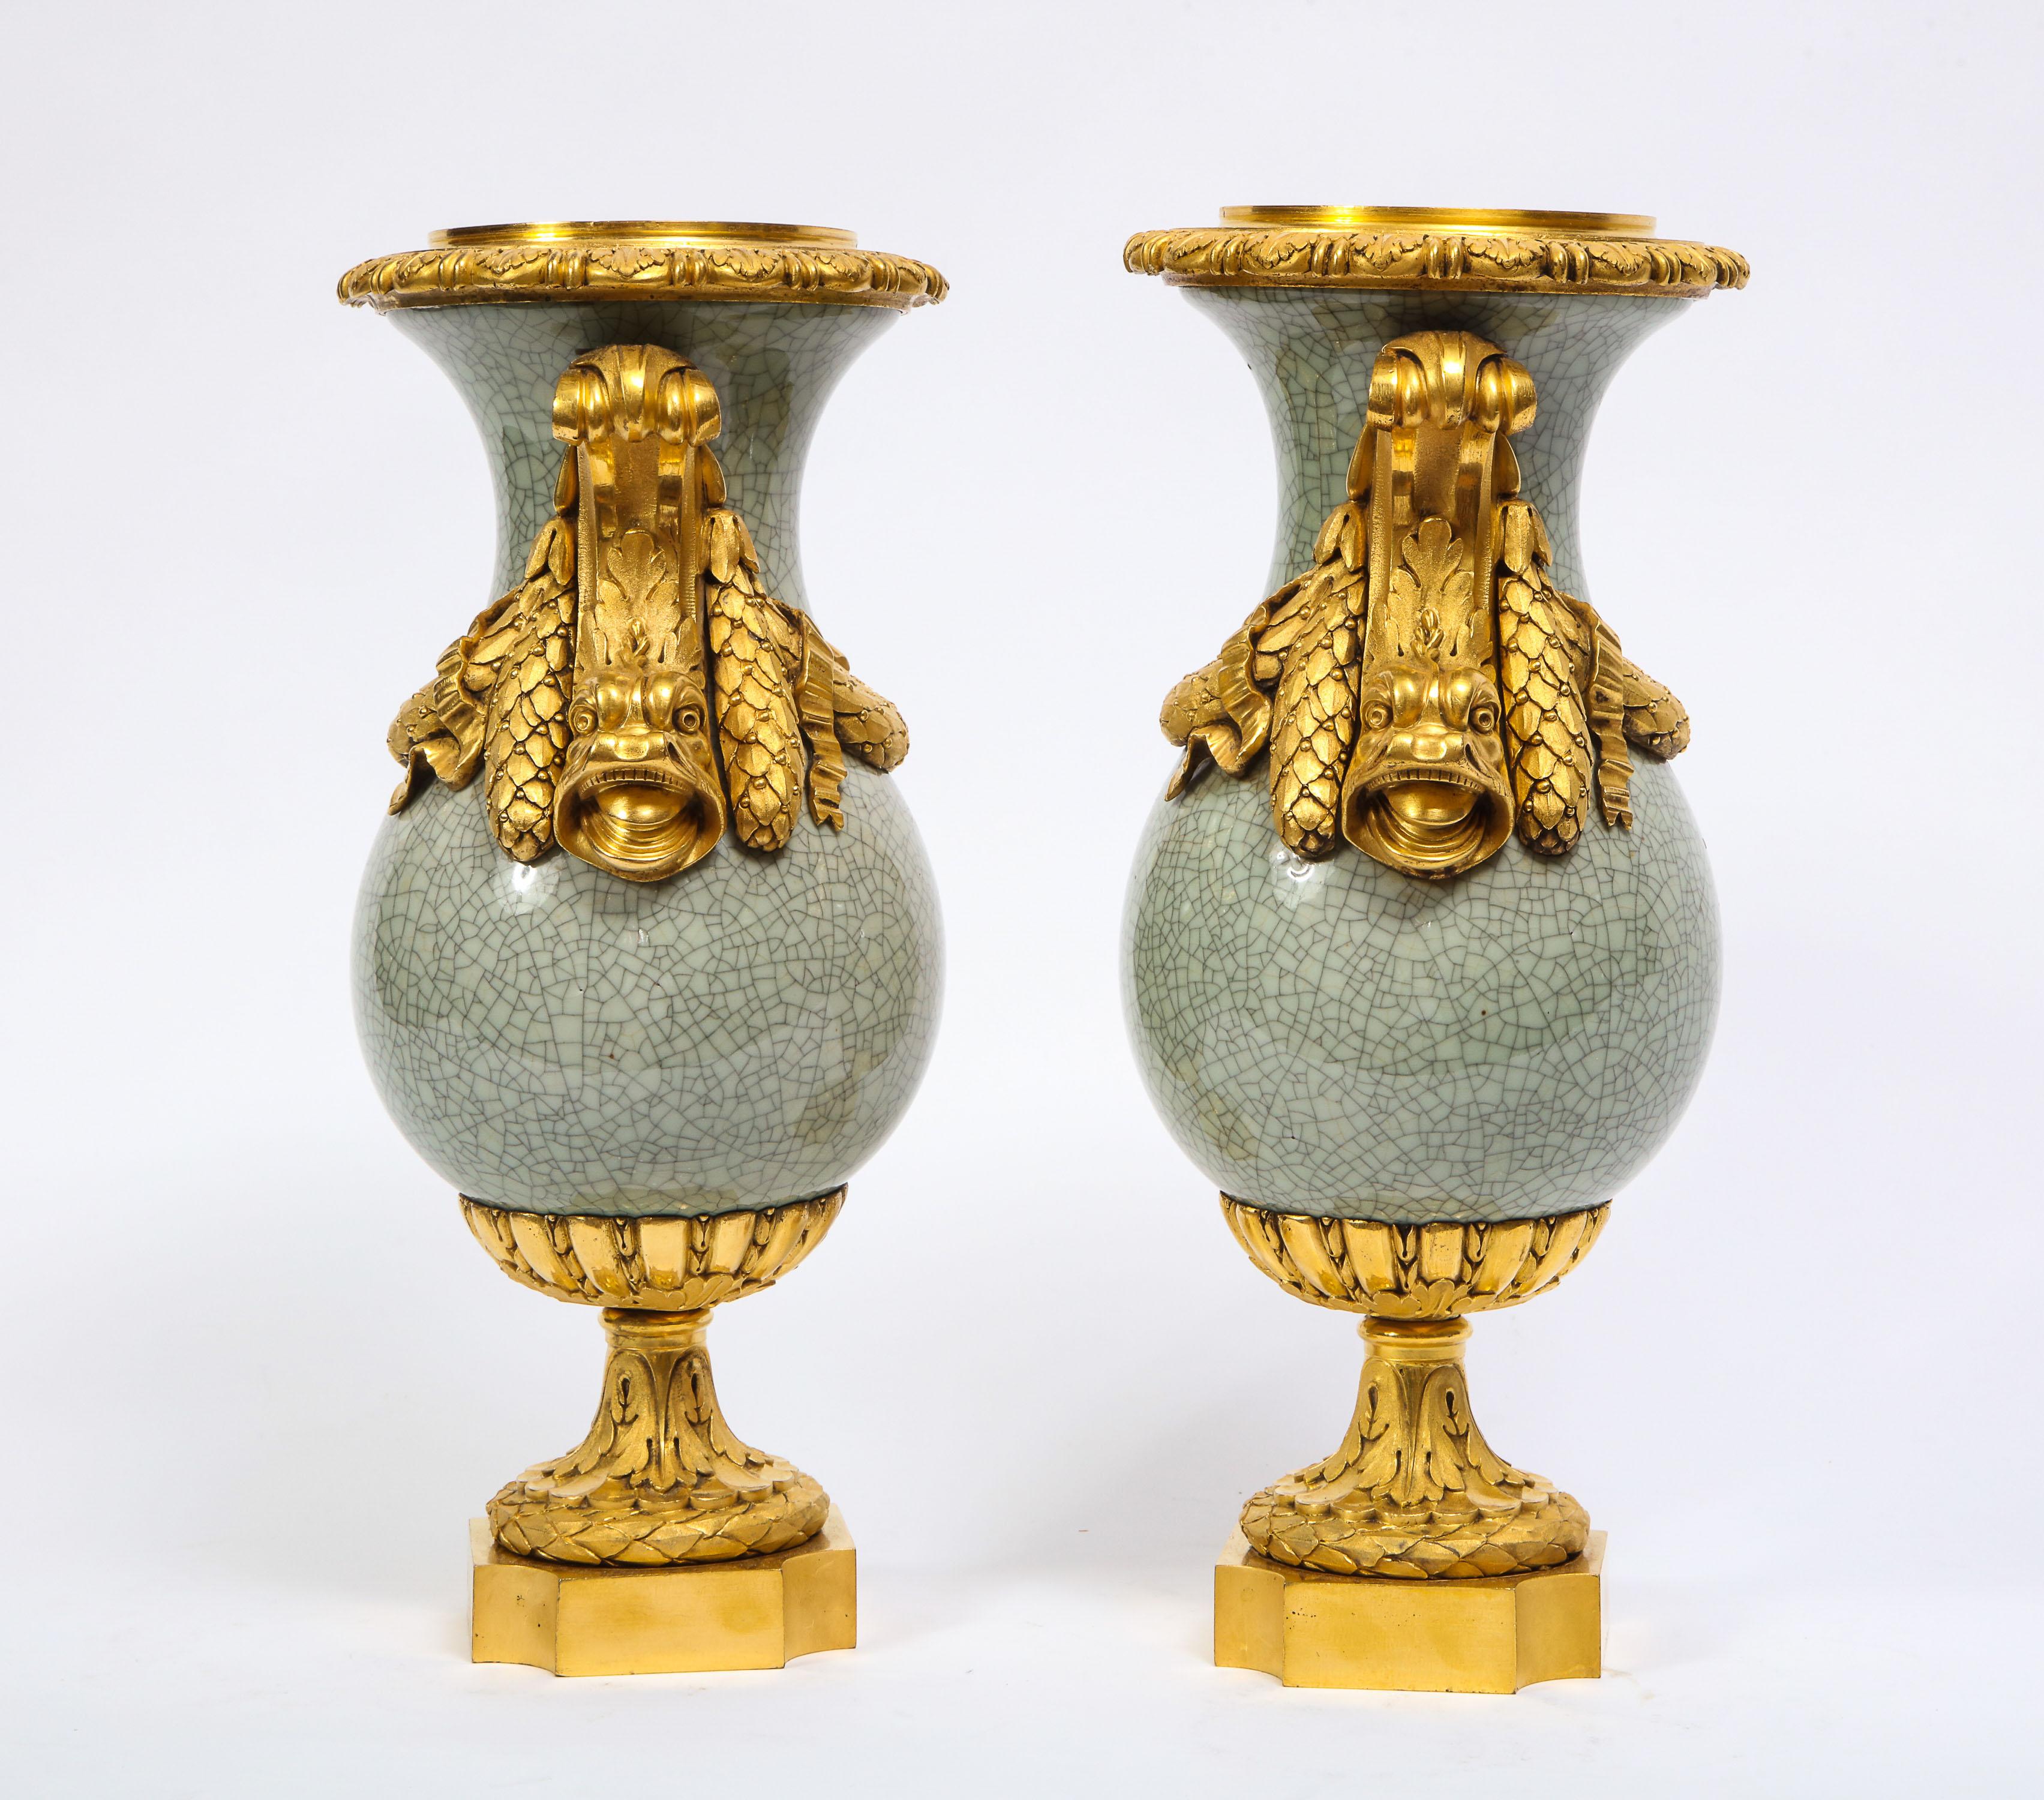 Gilt Louis XVI Ormolu-Mounted Chinese Celadon Crackle Vases with Dolphin Handles For Sale